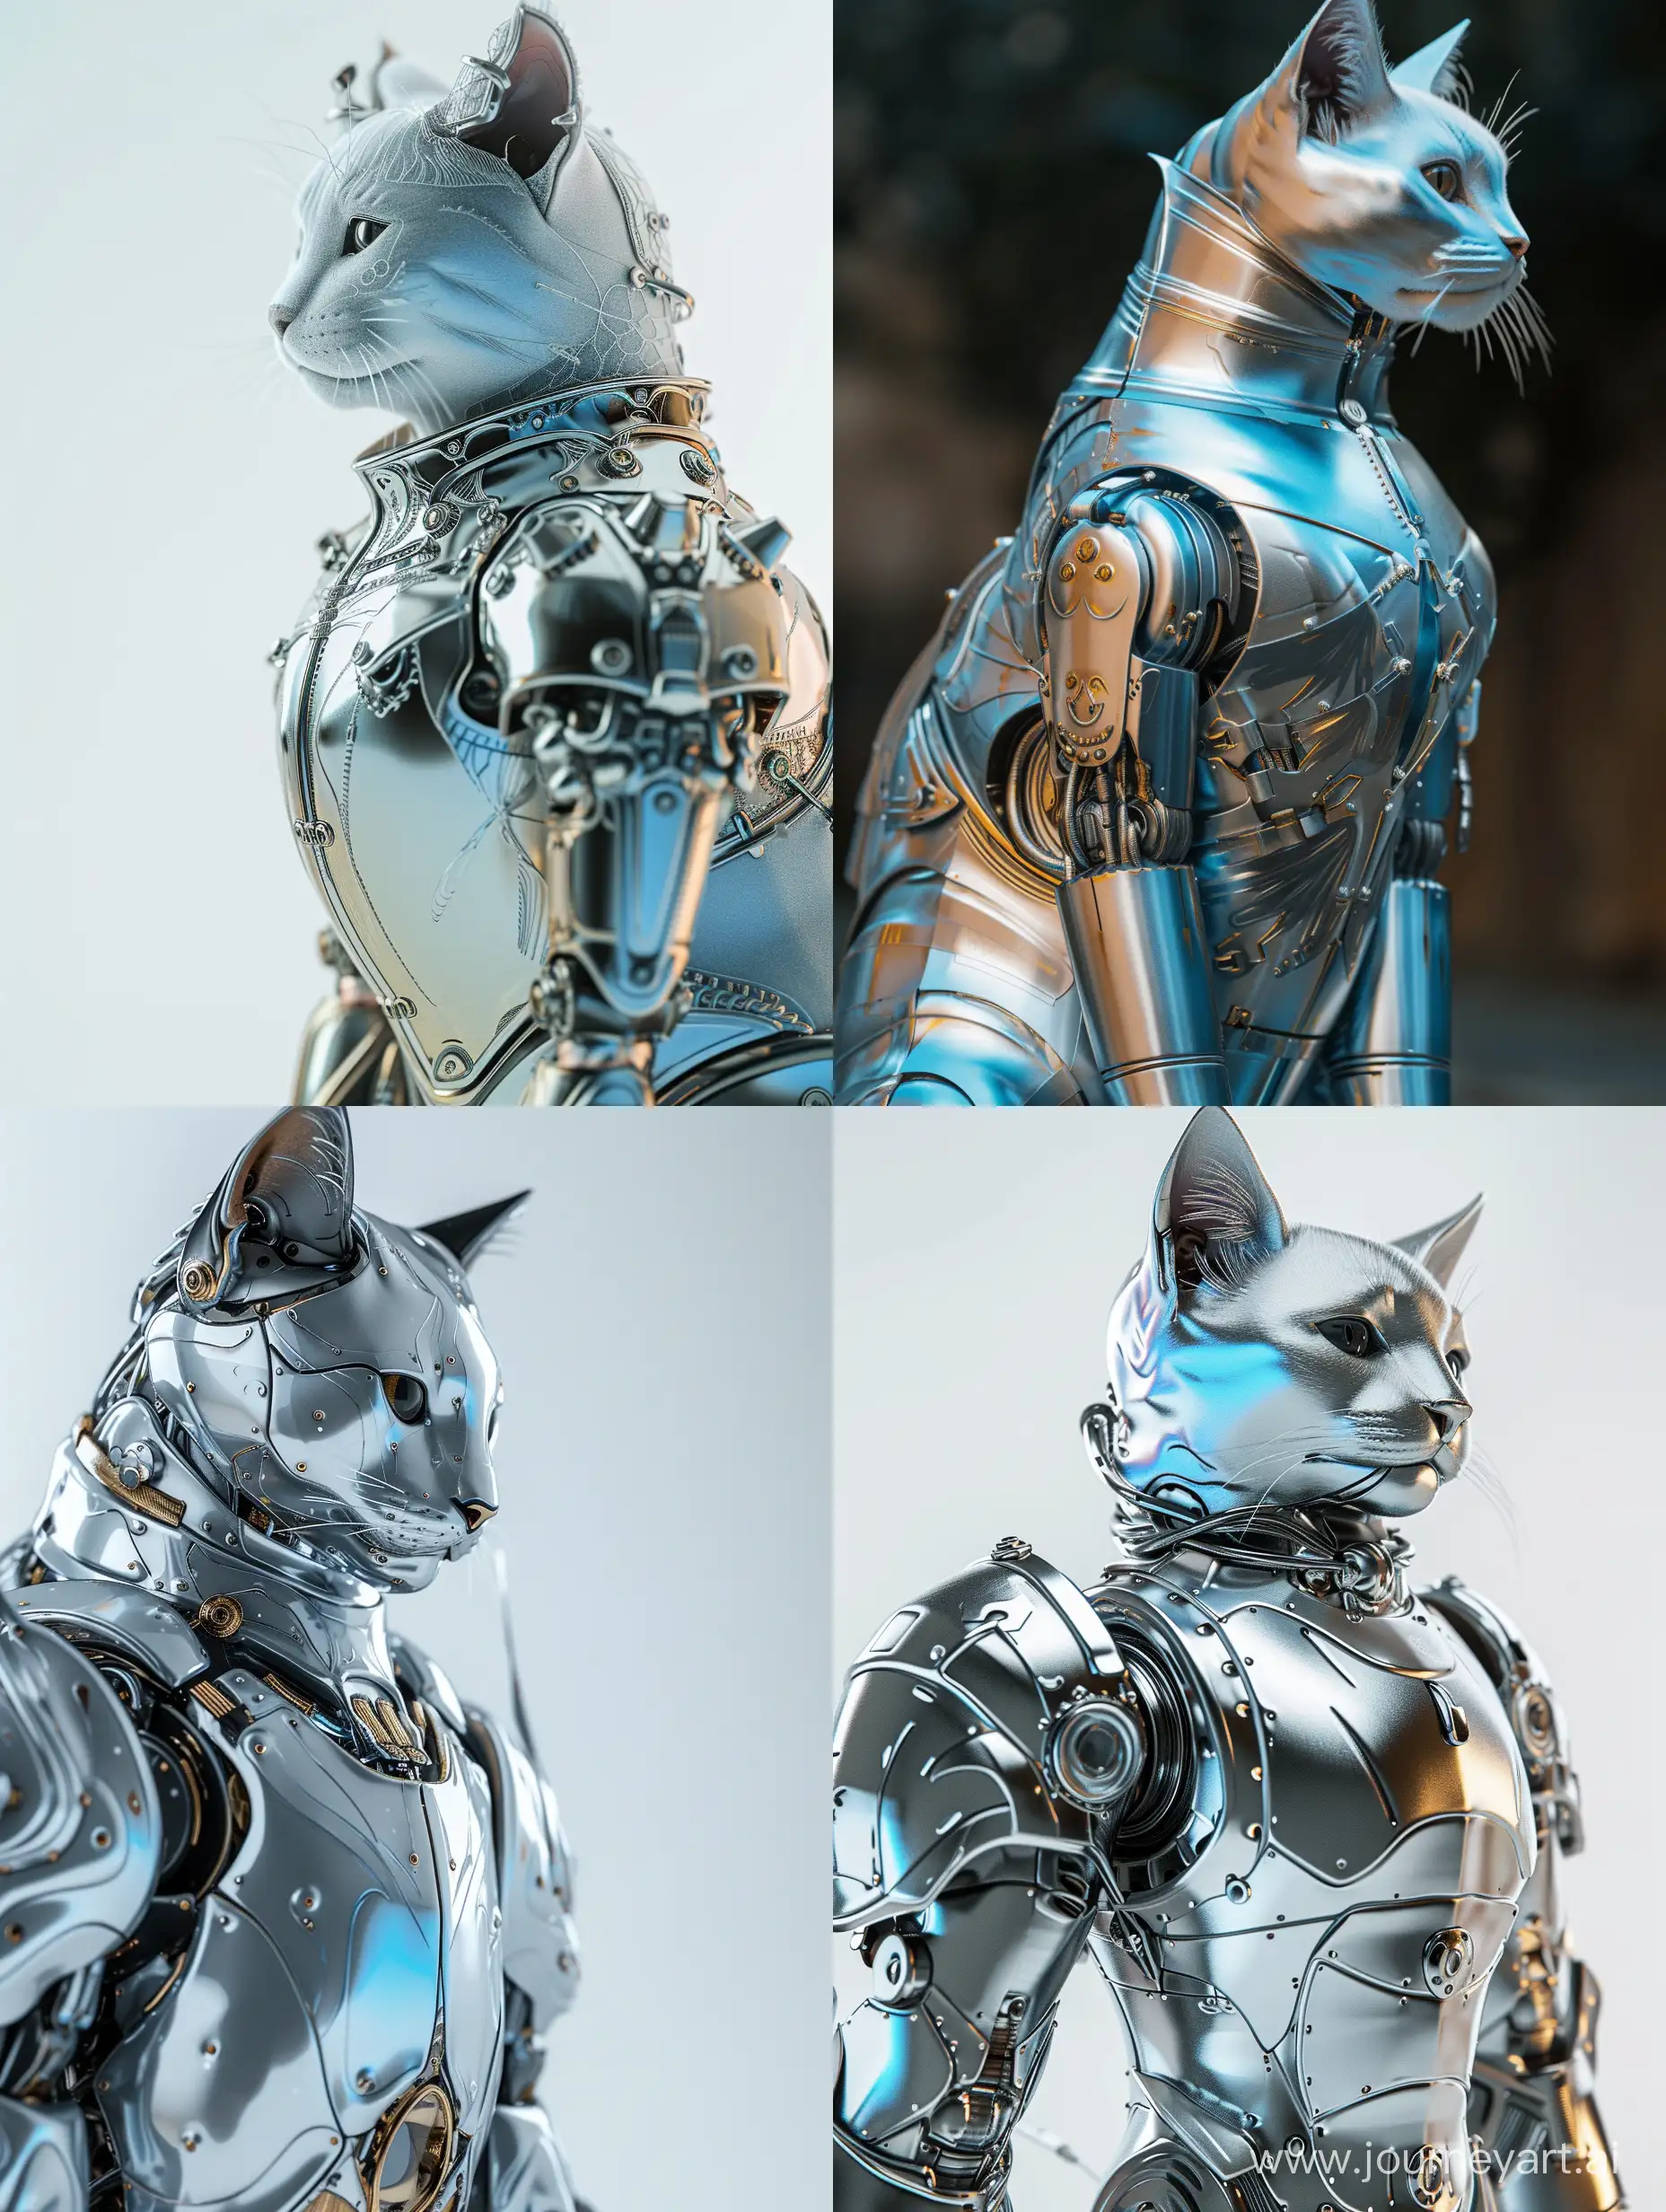 "A breathtaking scene unfolds in the 8k HDR best quality image, showcasing a magnificent Victorian-style robotic cat. Its sleek silver gradient coat shimmers with hints of blue and gold, exuding elegance and sophistication. Every intricate detail of its armor is captured in this professional close-up photograph, perfectly blending the beauty of the Victorian era with stunning realism."